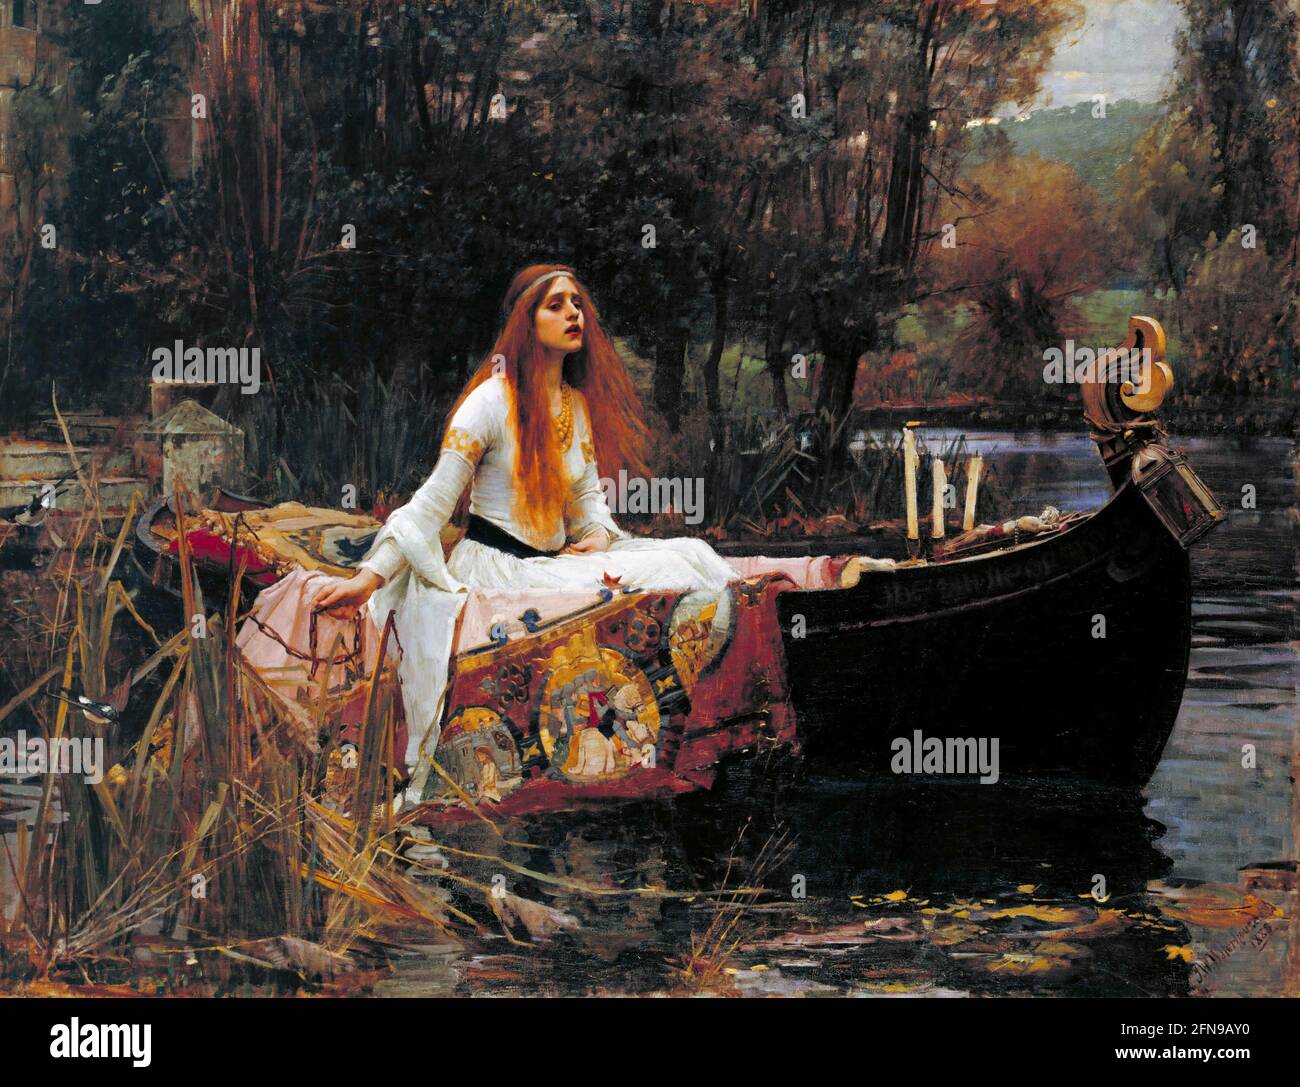 The Lady of Shalott by John William Waterhouse (1849-1917), oil on canvas, 1888. Painting based on the poem by Alfred Lord Tennyson. Stock Photo